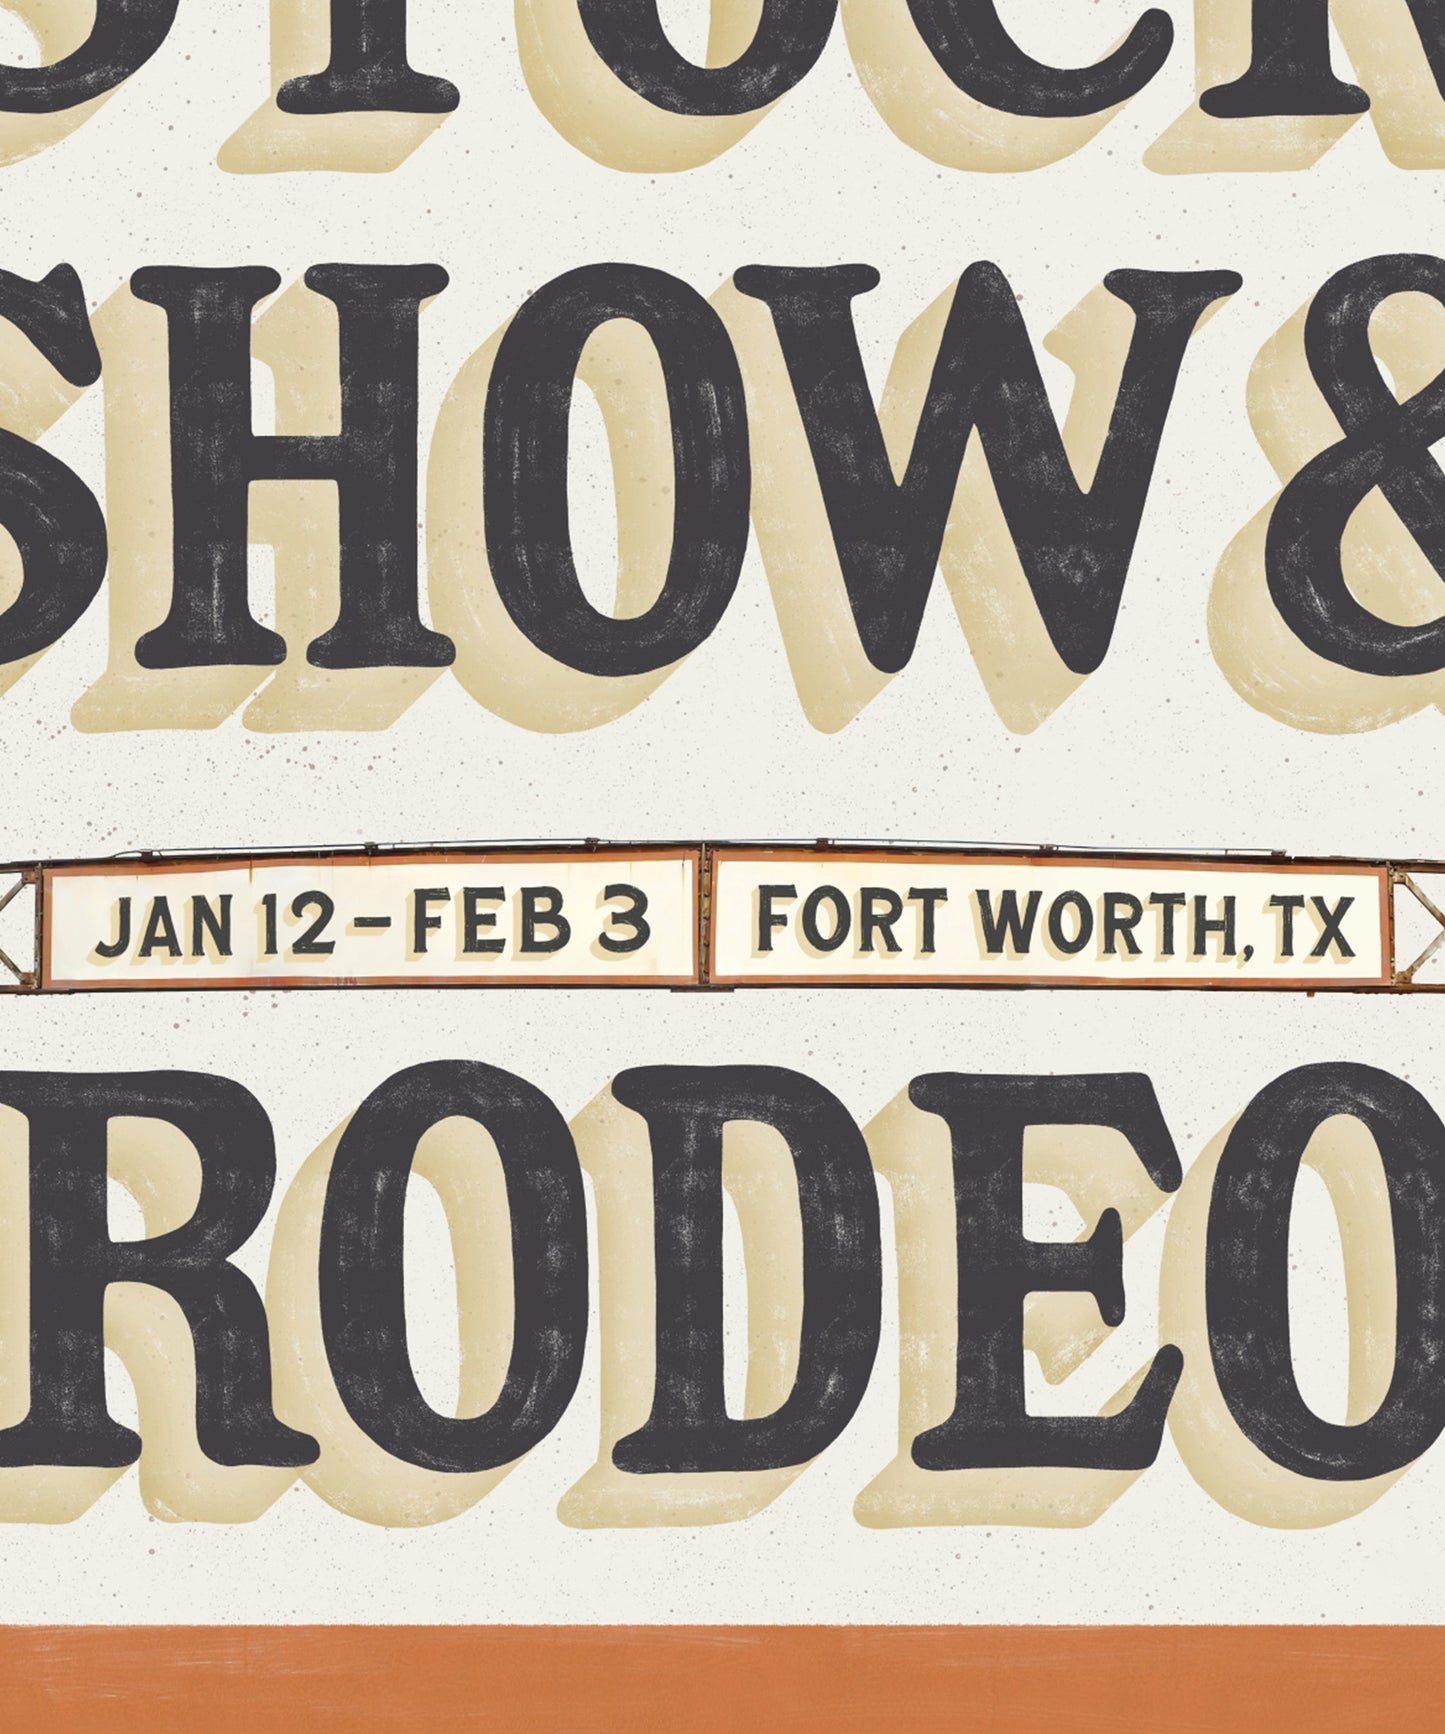 Fort Worth Stock Show and Rodeo Poster